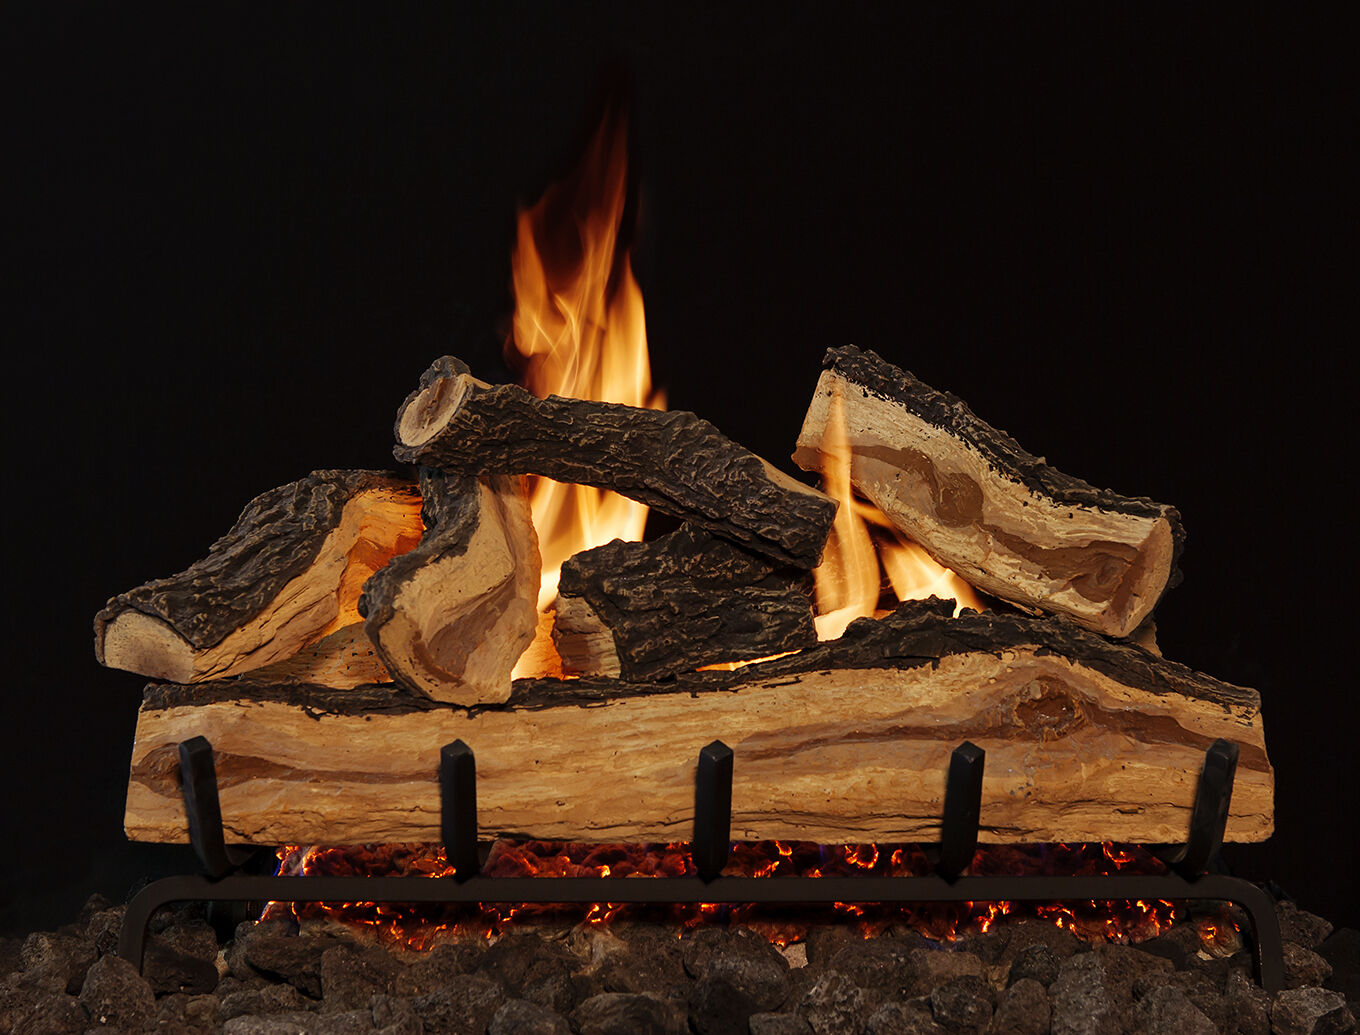 A close-up view of a traditional, oak-style gas log set with natural bark detailing and full, golden flames.